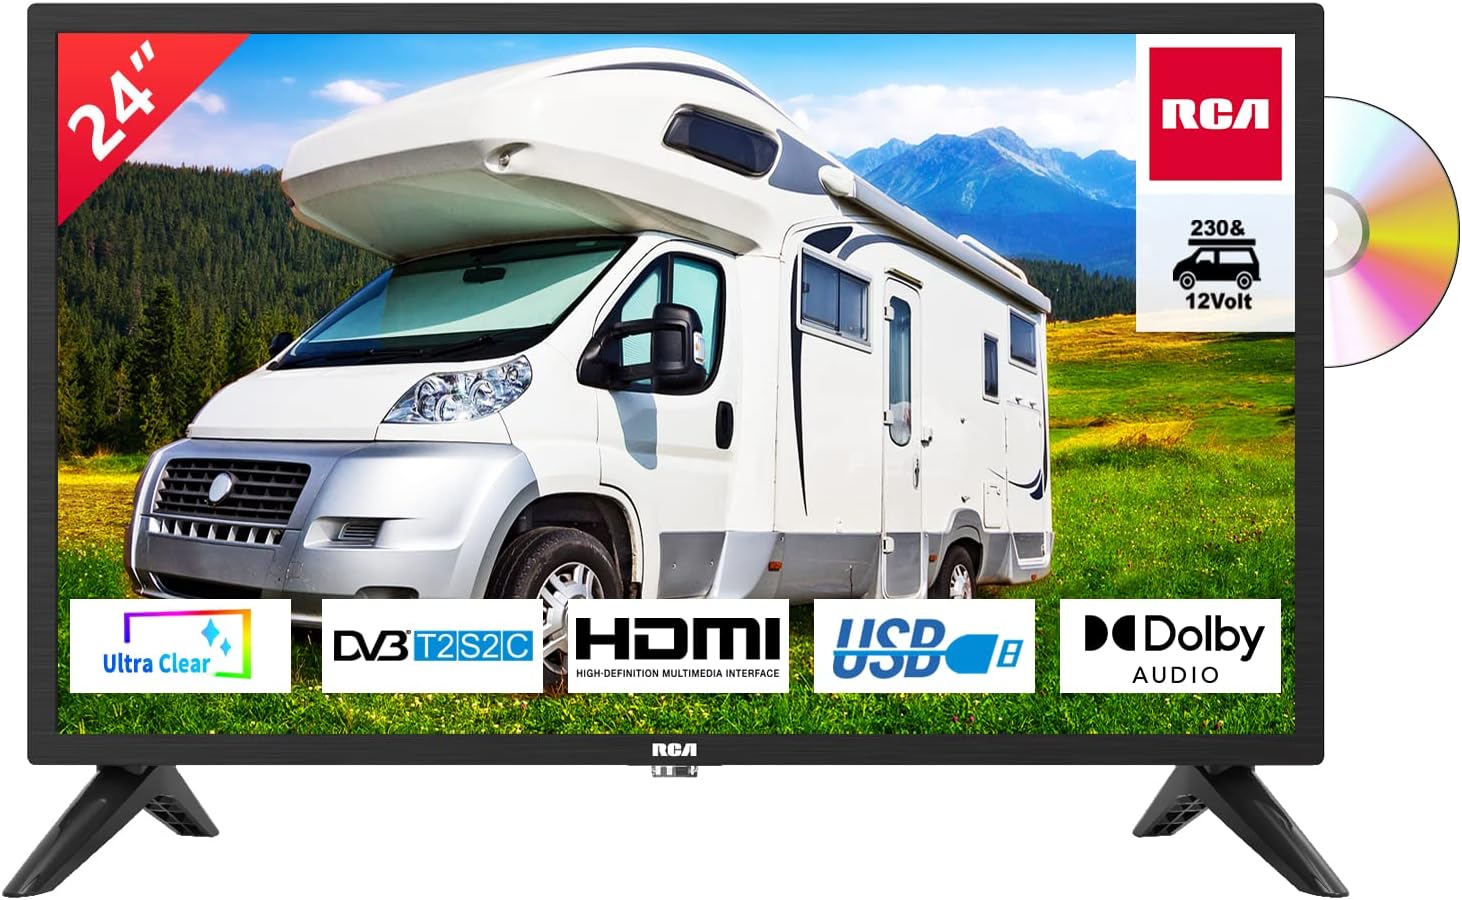 RCA RD24H2CU TV 24 Inch (TV 60 cm) with Built - in DVD Player for Motorhomes and Caravans 12 V Car Adapter, Dolby Audio, Triple Tuner DVB - C/T2/S2, HDMI, USB, Digital Audio Output, 230 V/12 V - Amazing Gadgets Outlet